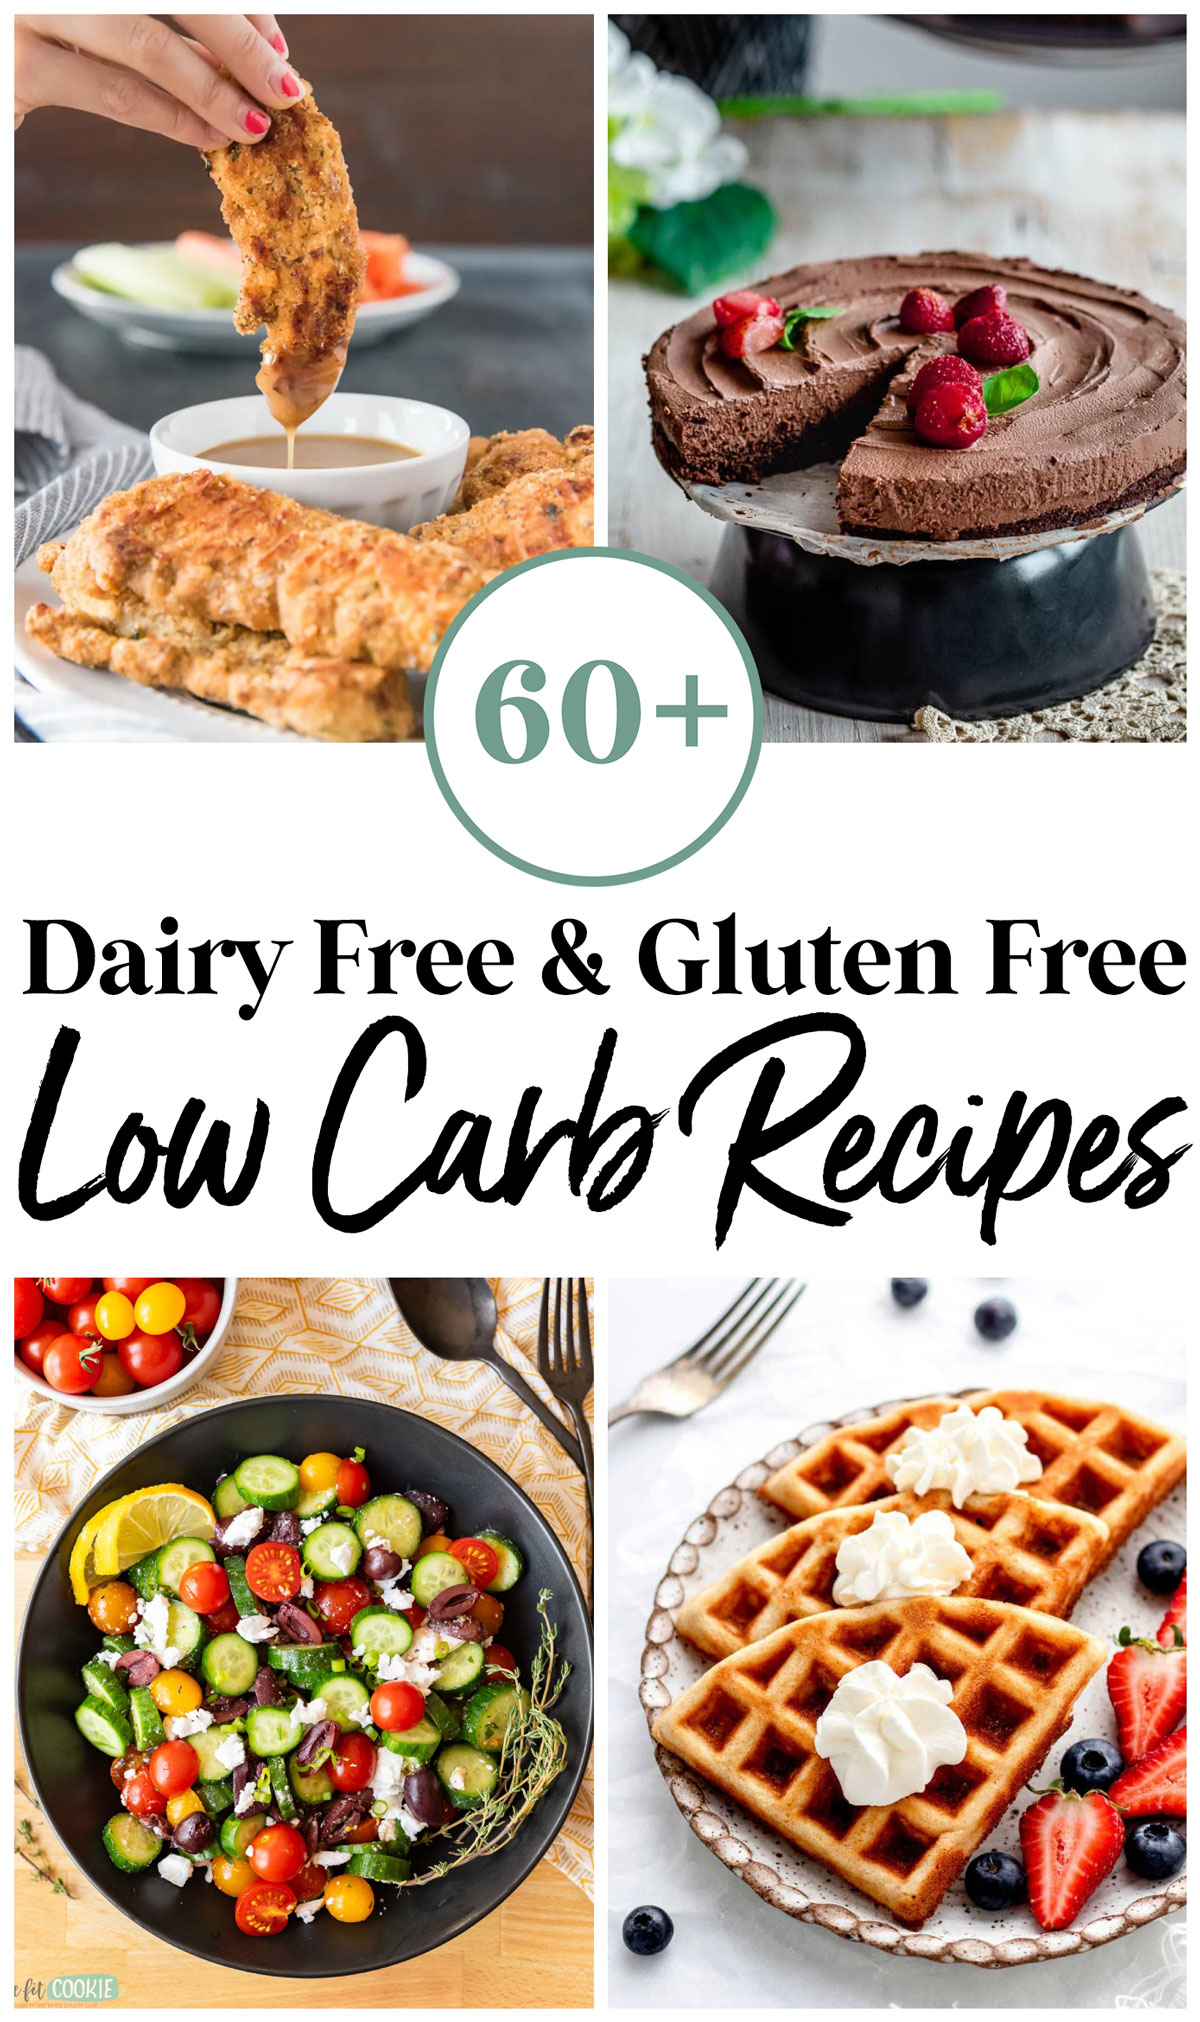 Photo collage image showing 4 dairy free low carb recipes with text overlay that says "60+ dairy free and gluten free low carb recipes".